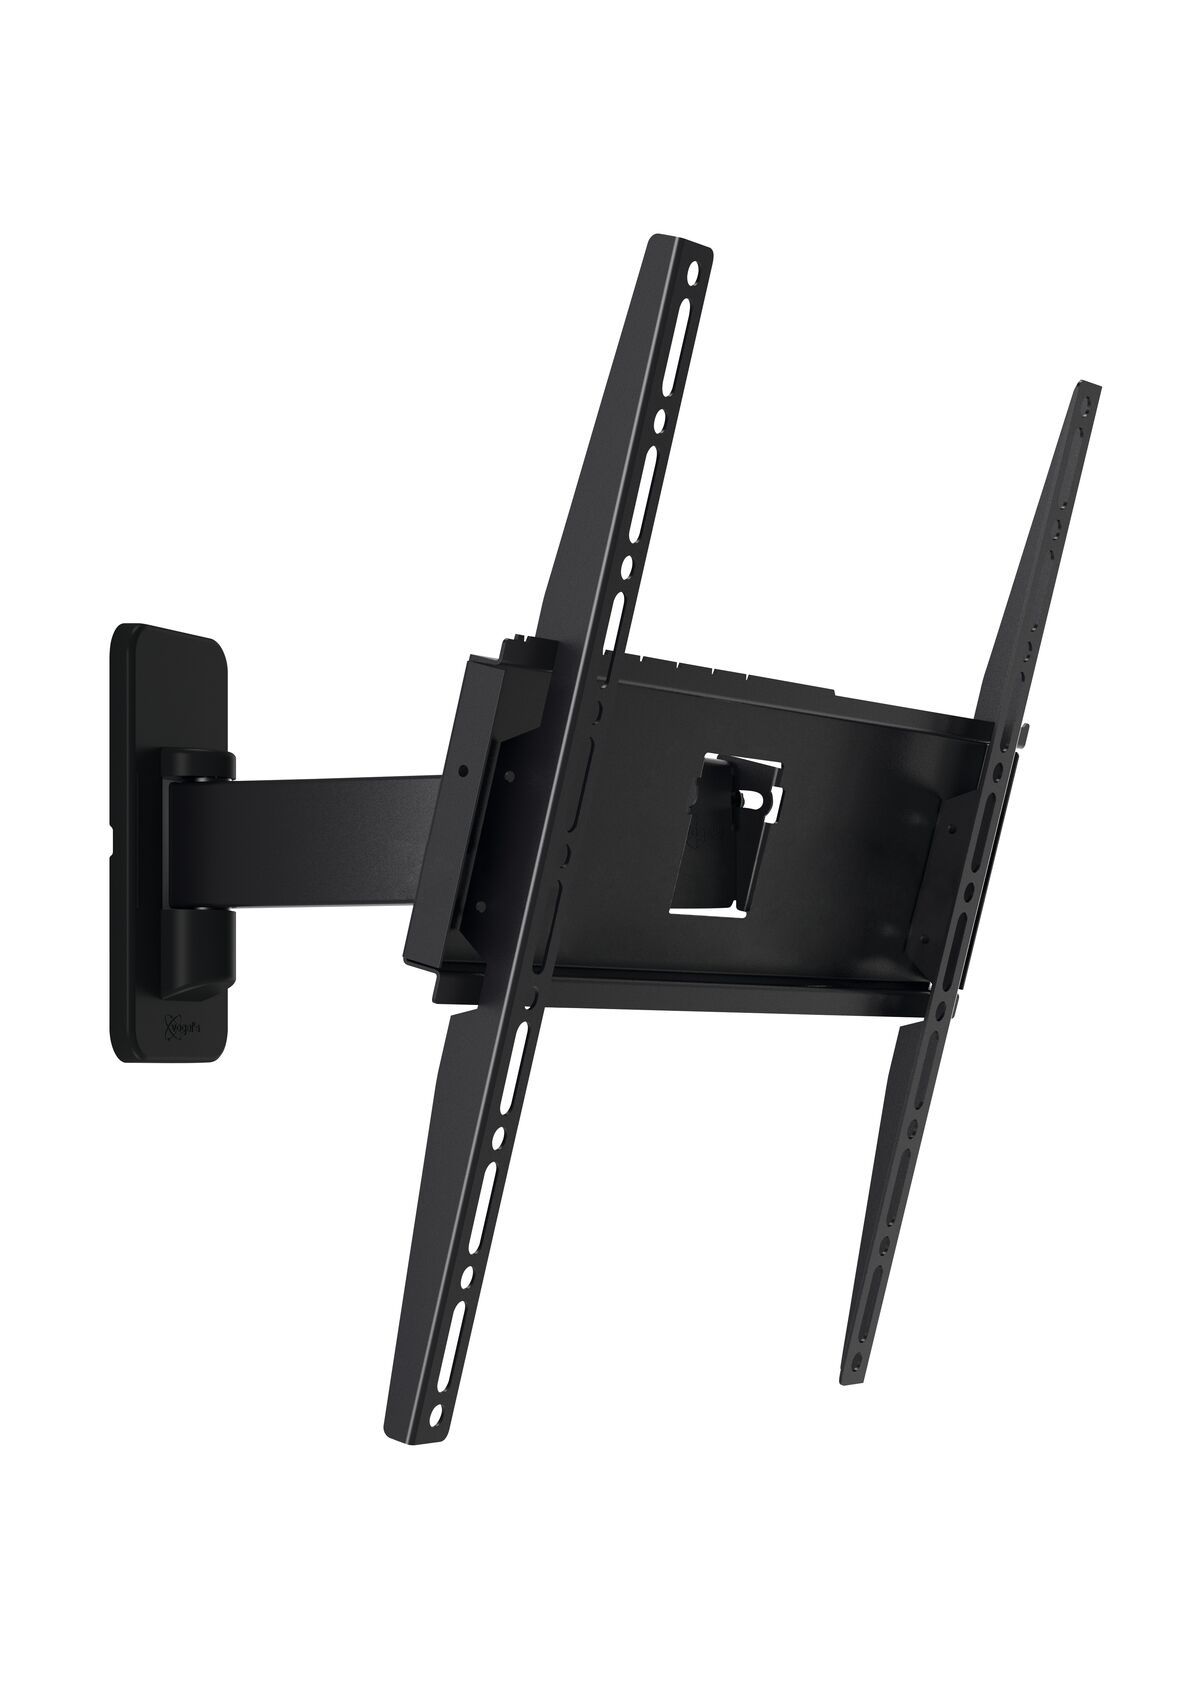 Vogel's MA 3030 Full-Motion TV Wall Mount - Suitable for 32 up to 65 inch TVs - Motion (up to 120°) - Tilt up to 15° - Product